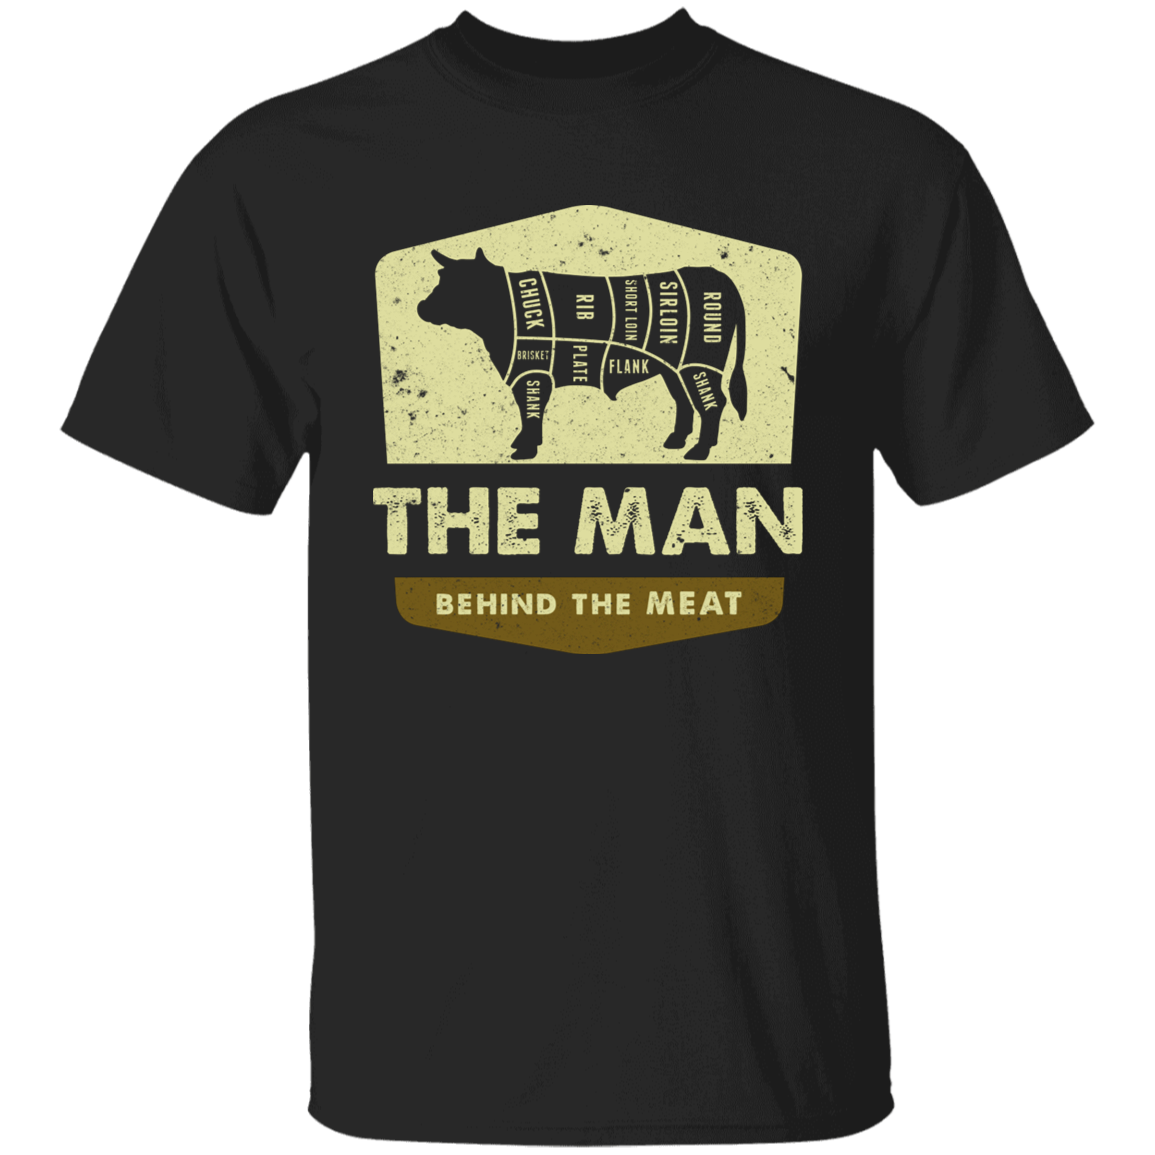 The Man Behind the Meat T-Shirt